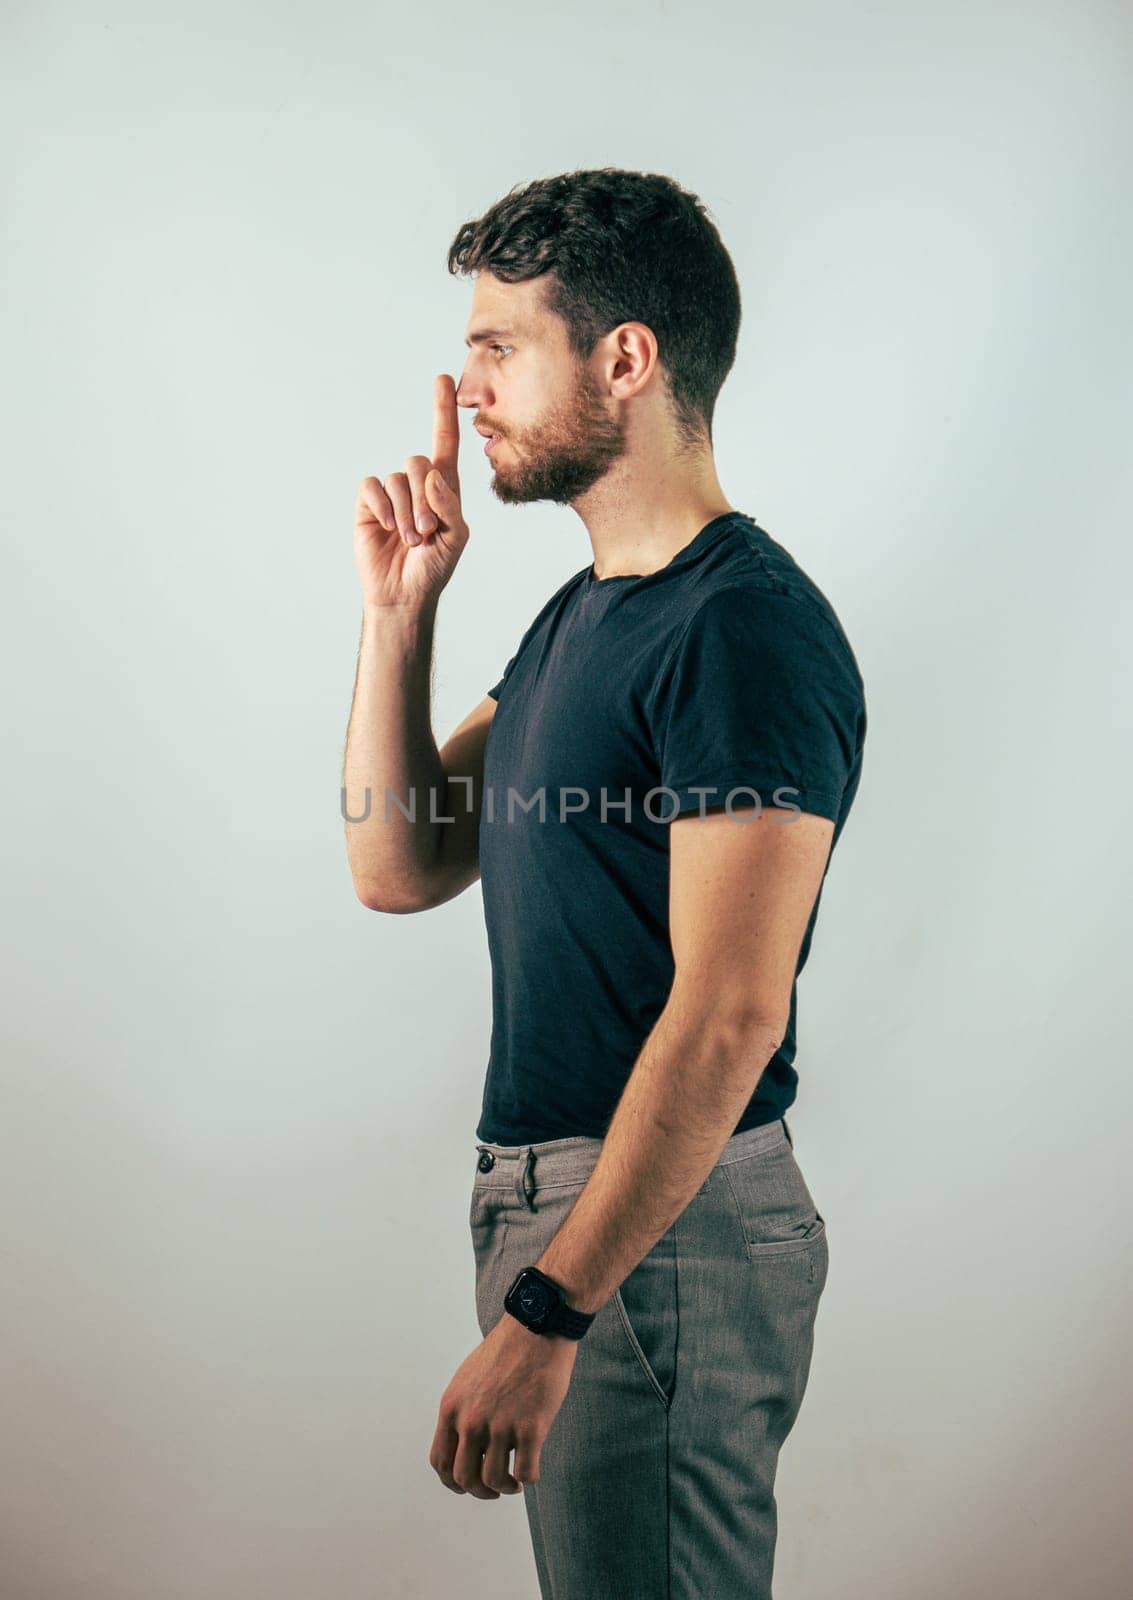 Young man doing hush sign with finger over his mouth, looking at camera by artofphoto